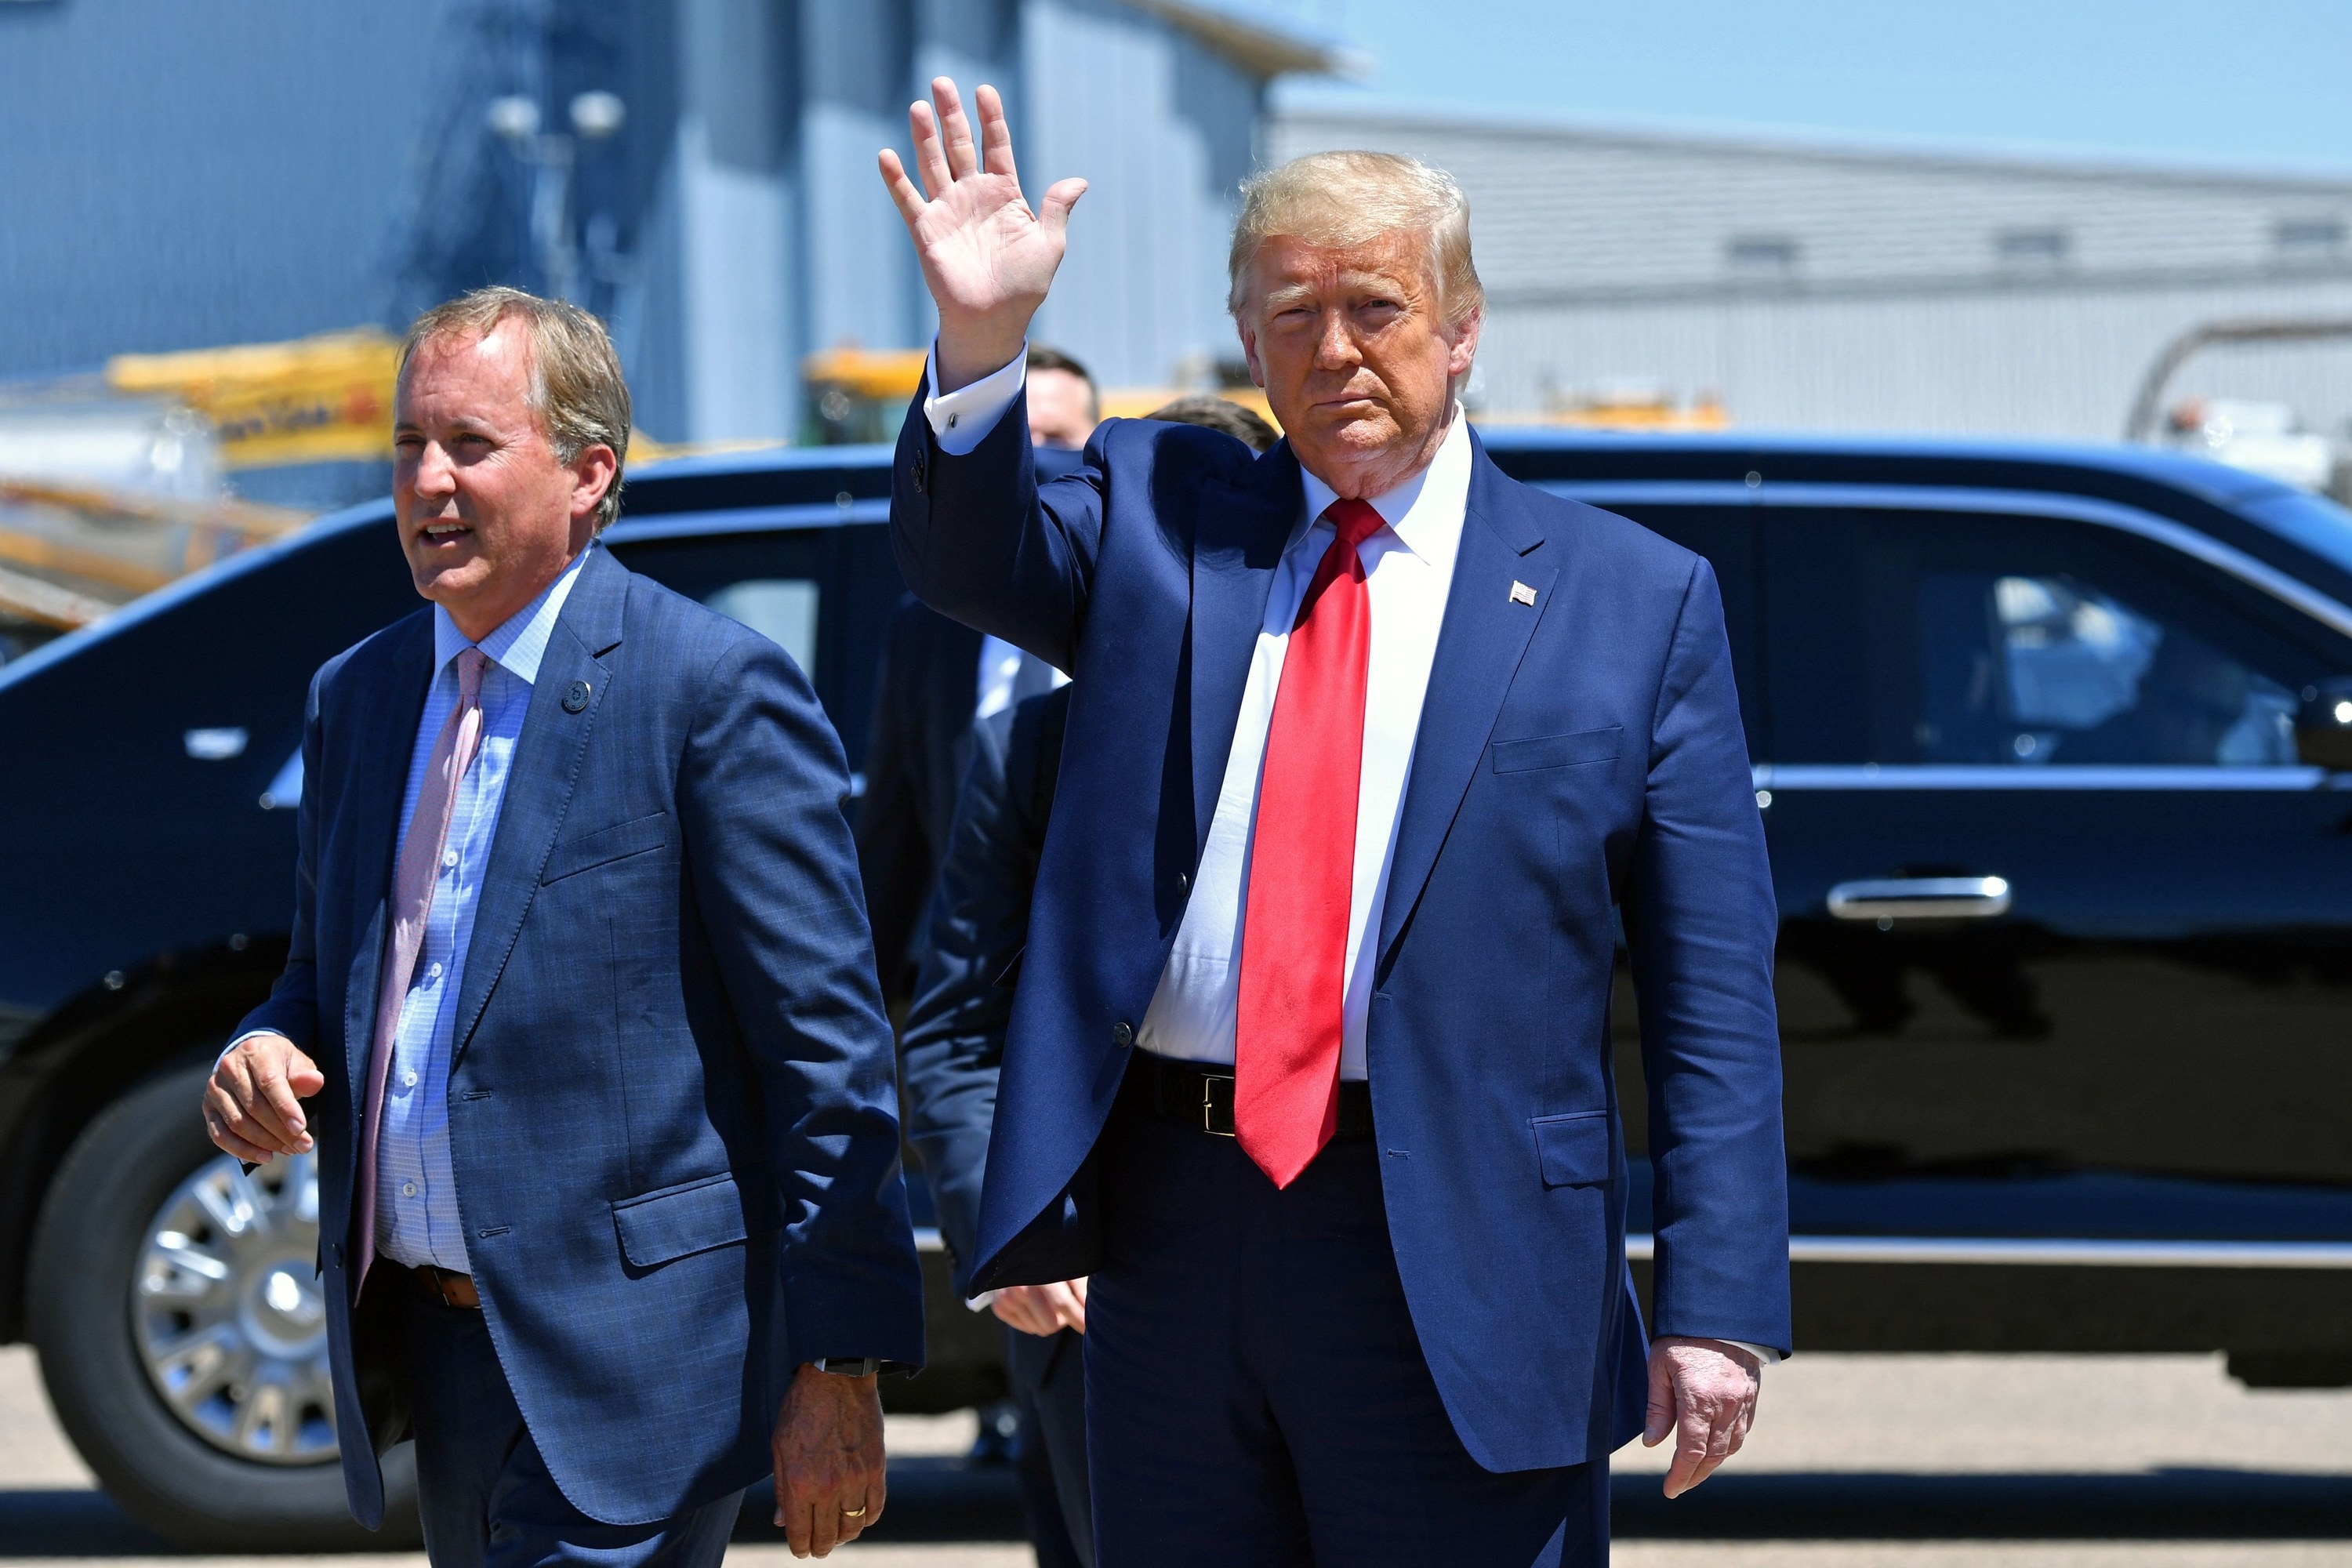 Donald Trump, wearing a big red tie, waves his hand, standing next to Ken Paxton outside in front of a black car from the presidential motorcade